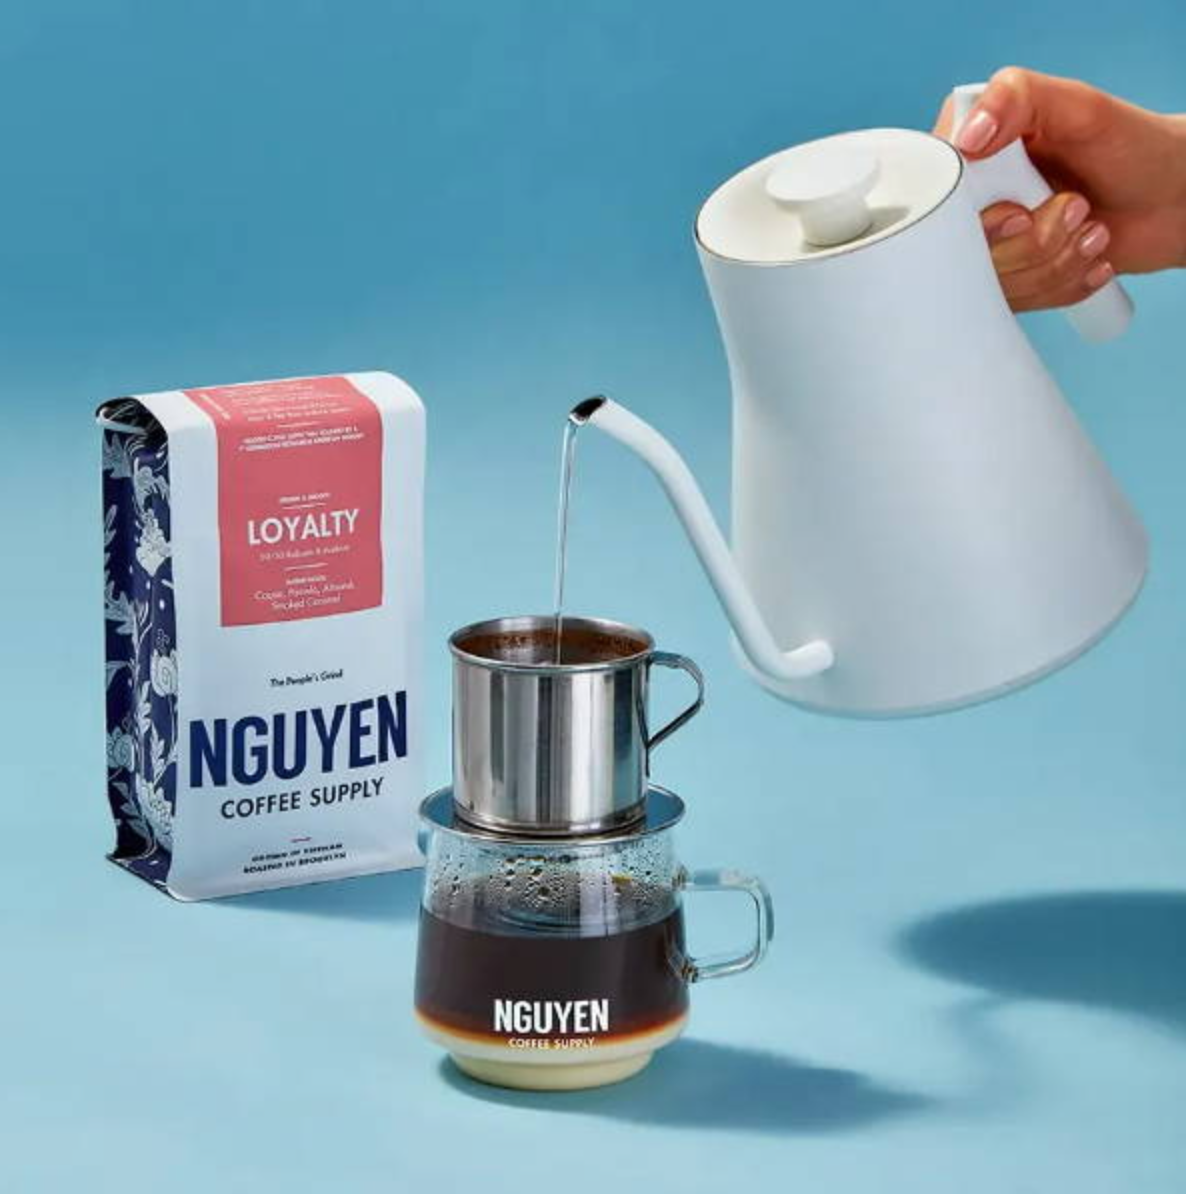 The Best Gifts for Coffee Lovers - The NYC Kitchen